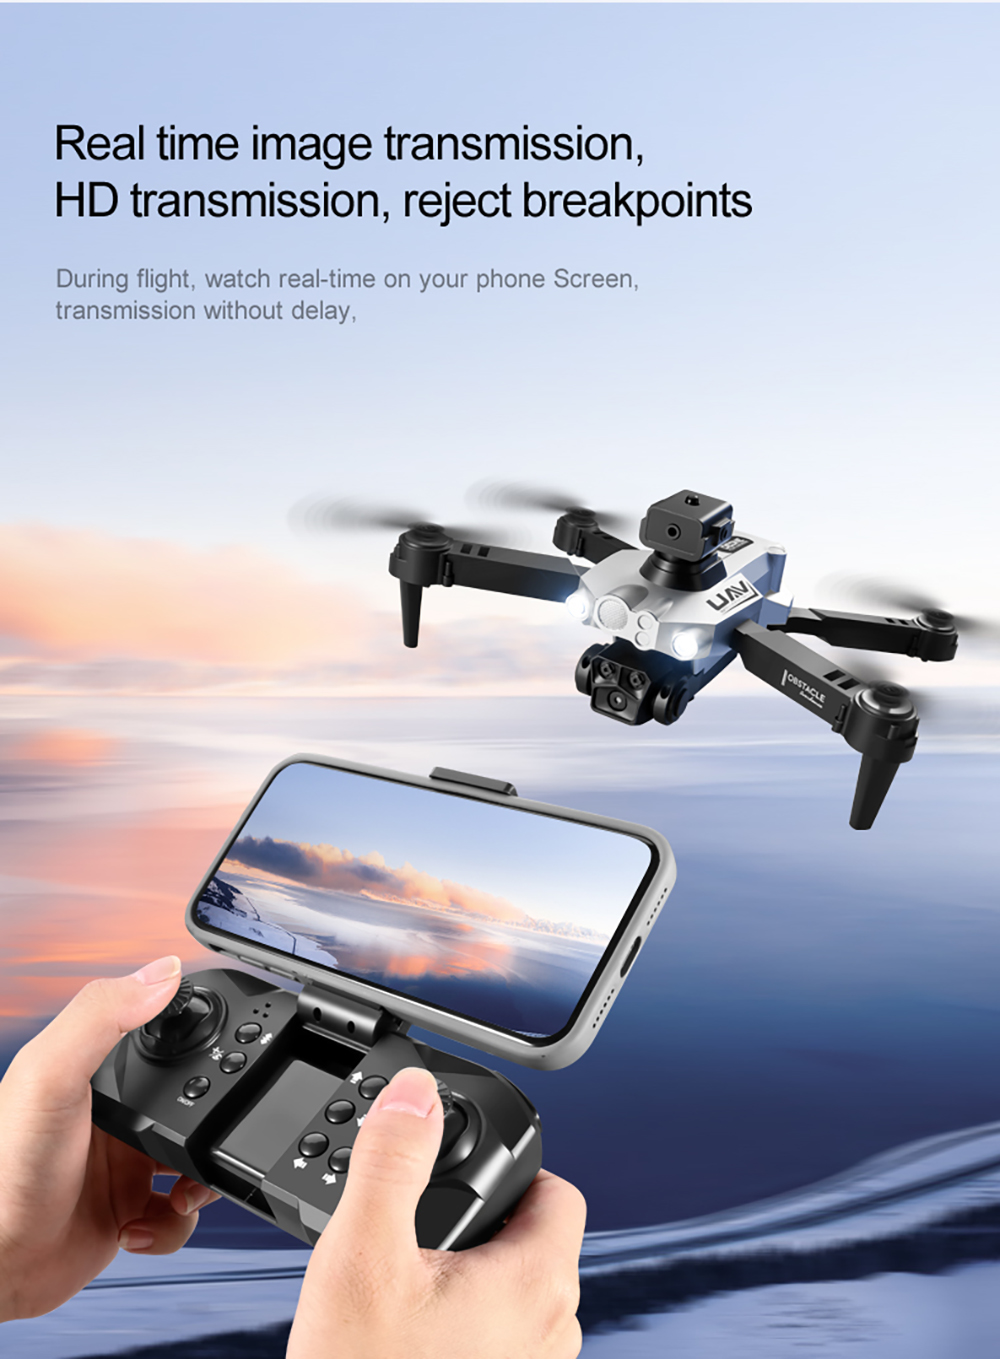 XLURC LU200 WiFi FPV with HD Dual Camera 360° Intelligent Obstacle Avoidance Optical Flow Positioning Foldable RC Drone Quadcopter RTF